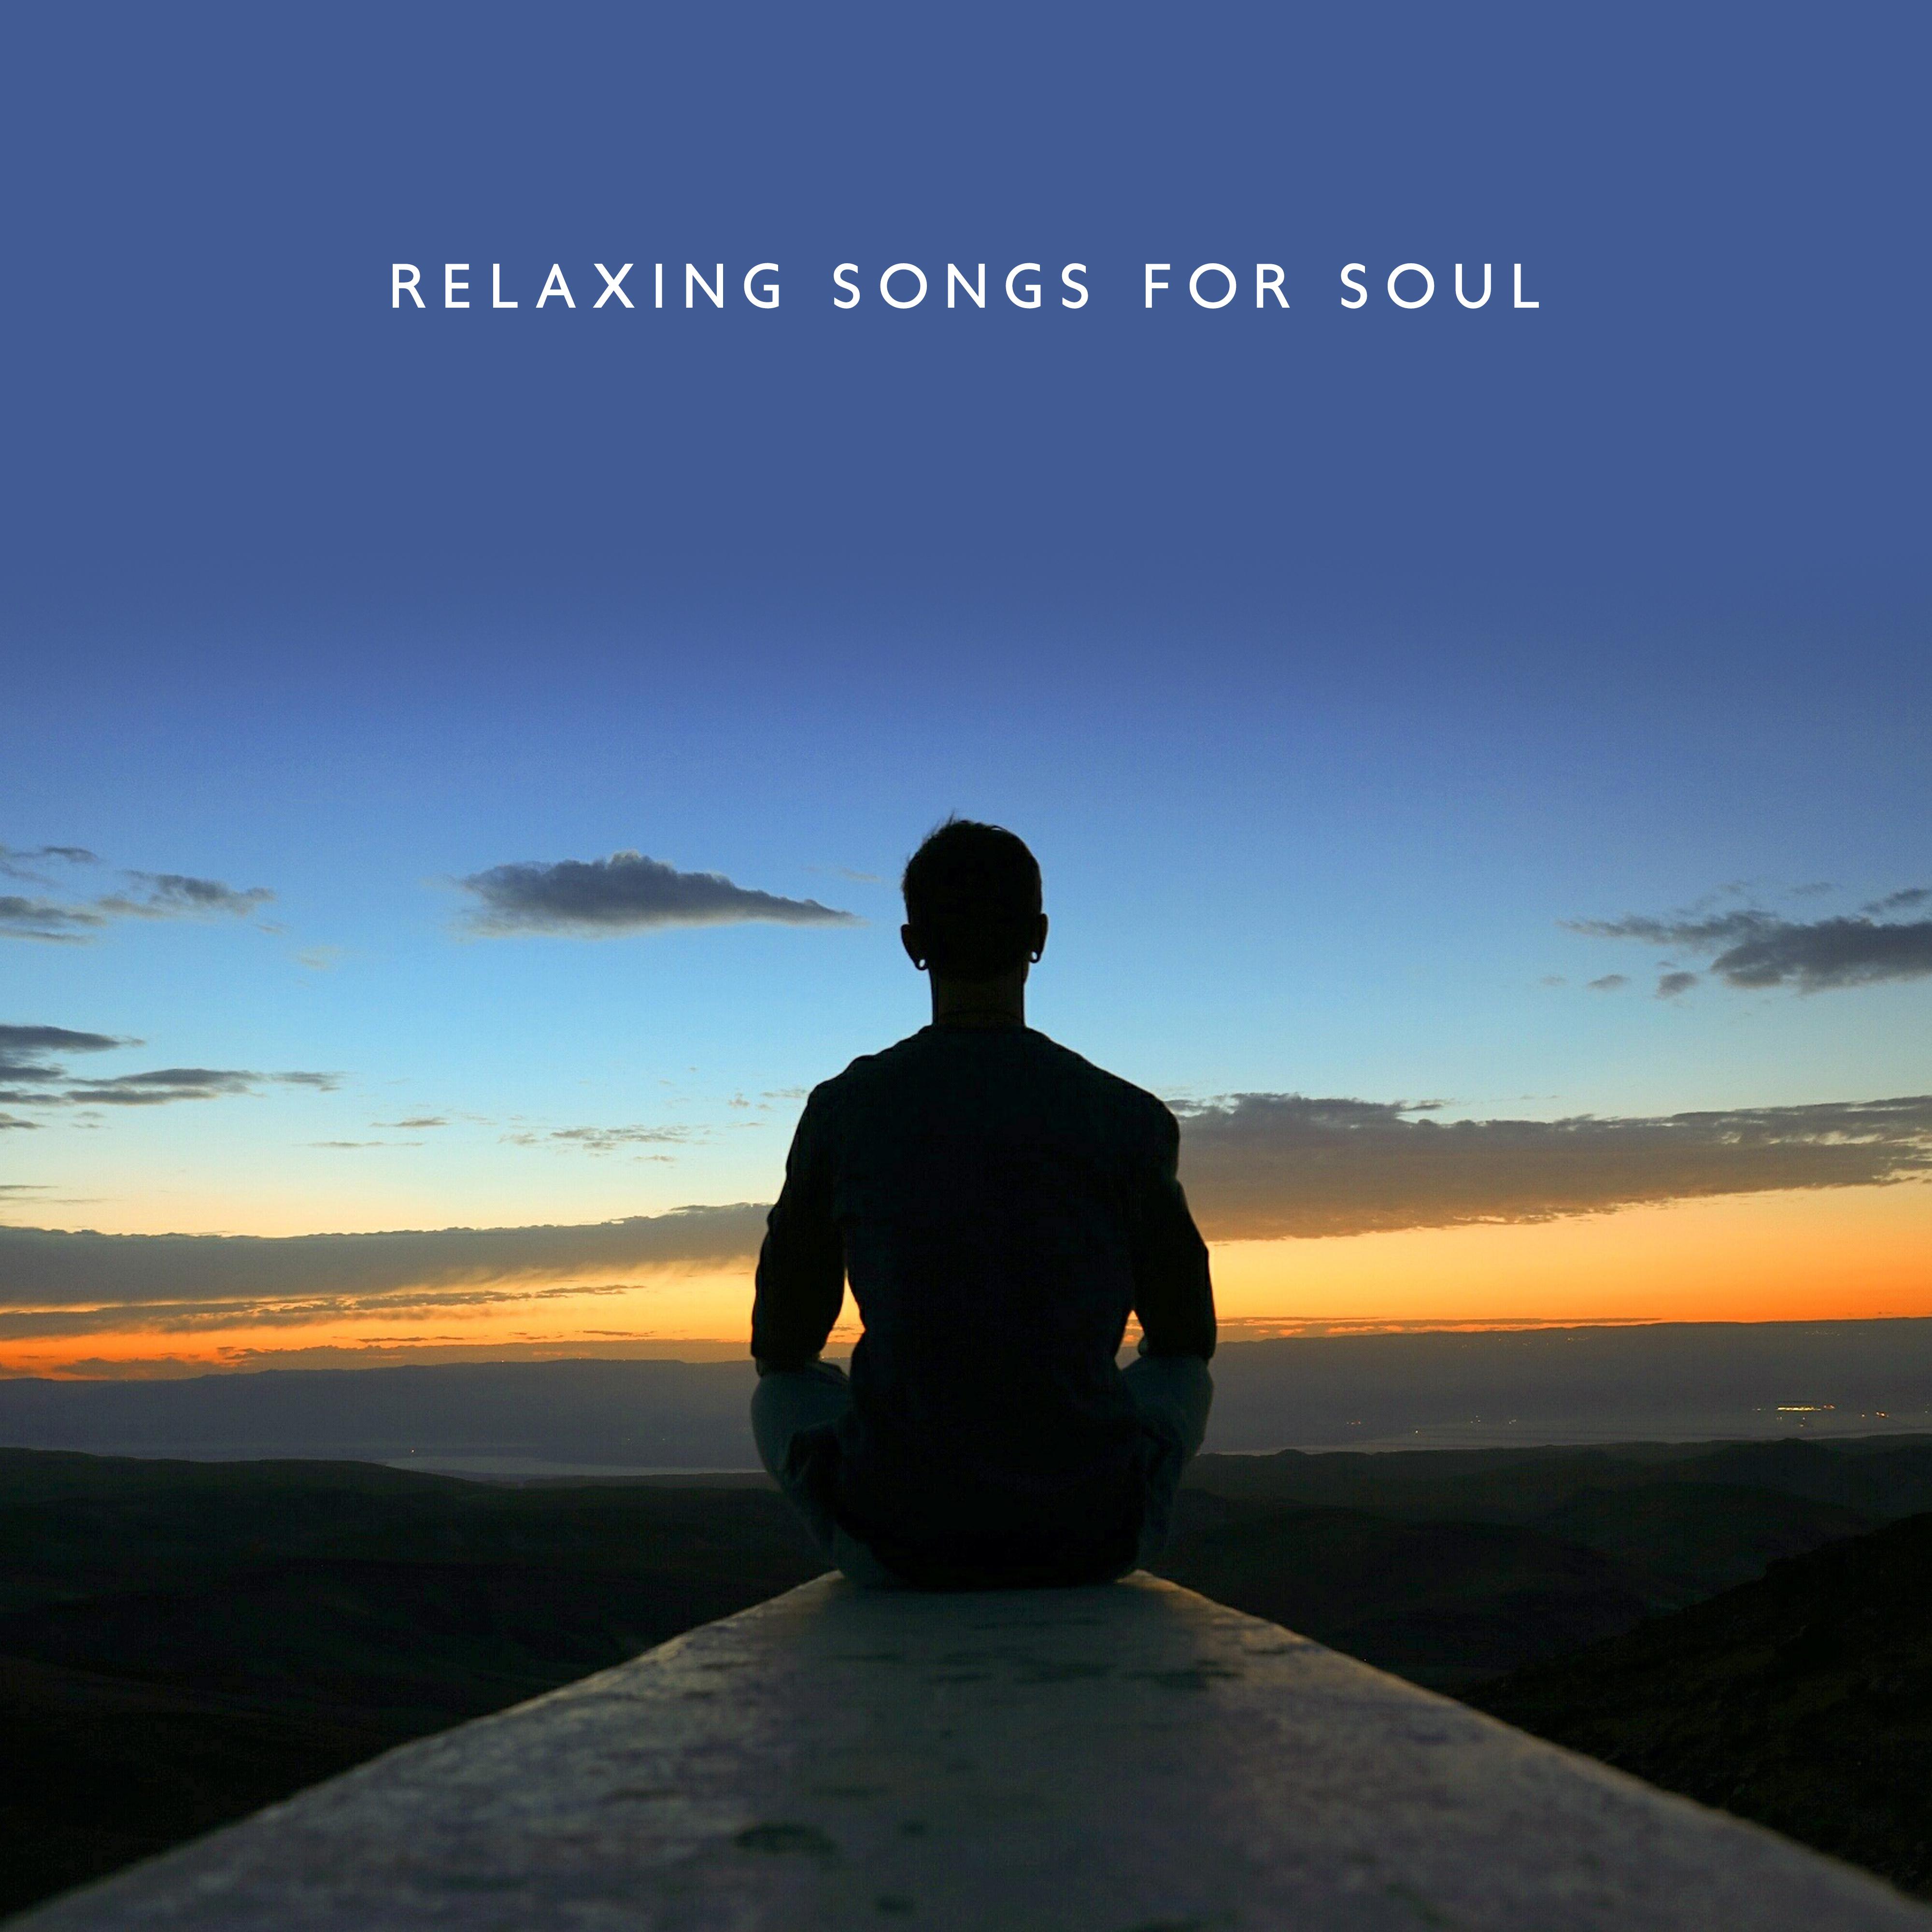 Relaxing Songs for Soul – Meditation Music Zone, Yoga Music to Calm Down, Meditation Therapy, Gentle Melodies for Meditation, Sleep, Yoga, Pure Relaxation